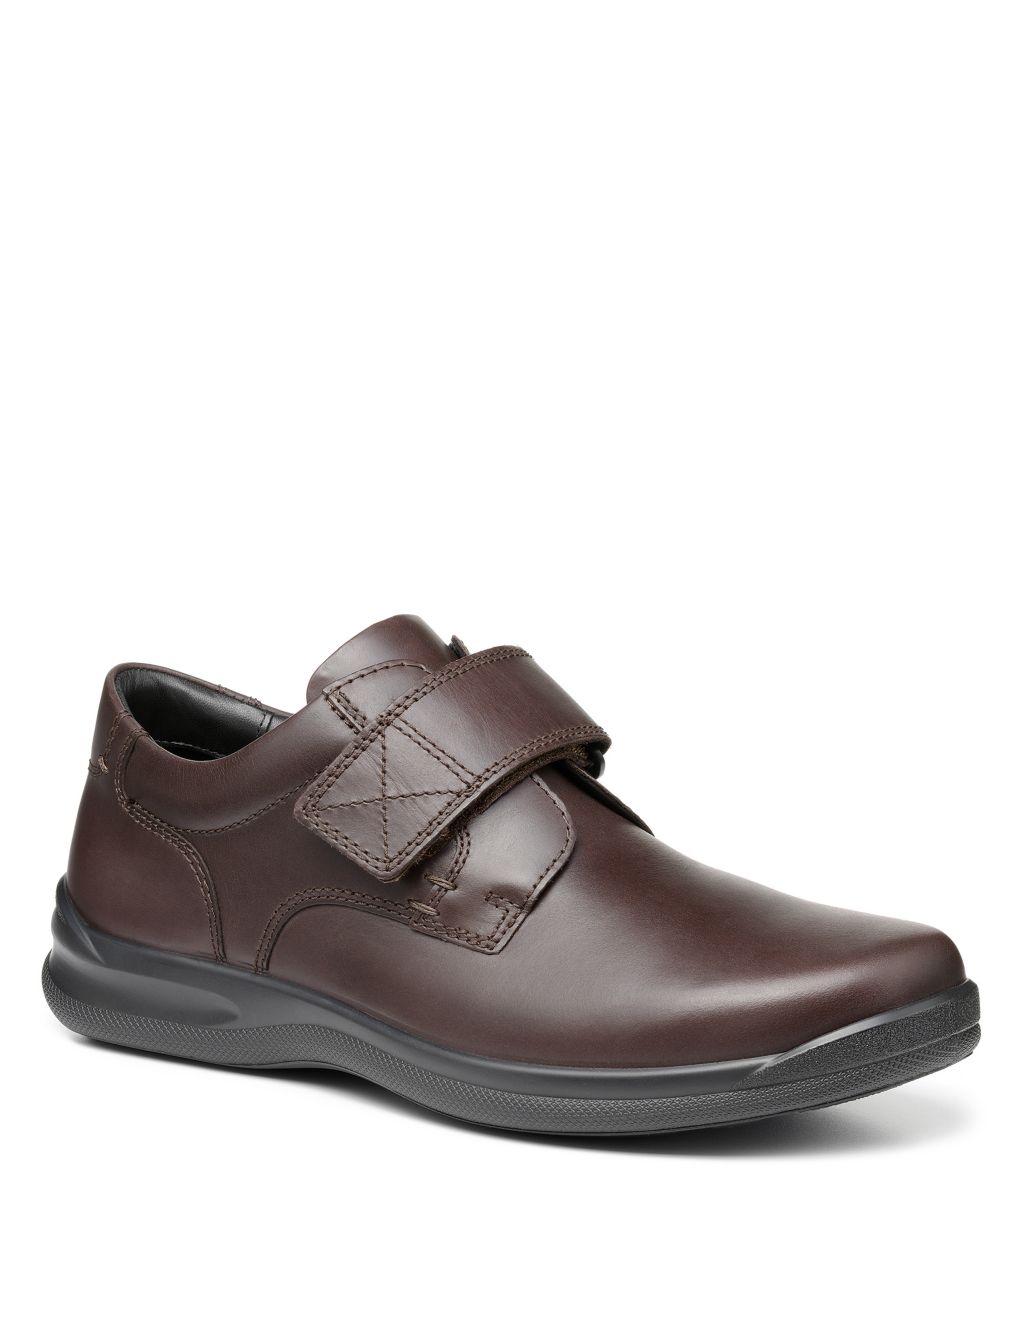 Sedgwick II Leather Derby Shoes image 3